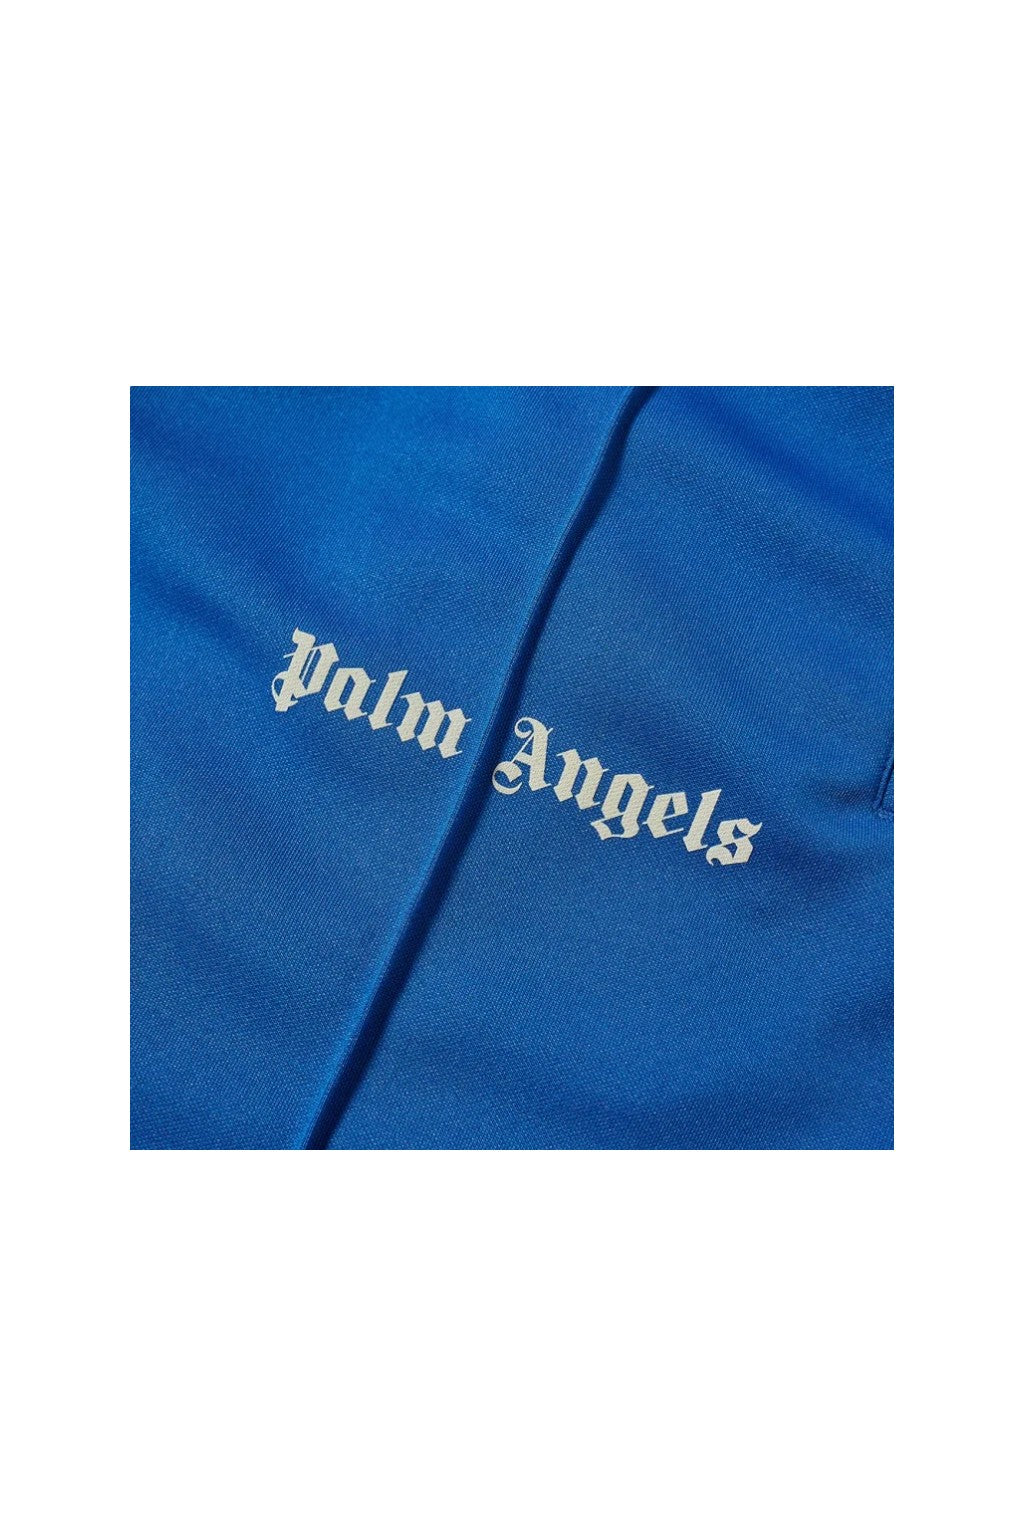 Palm Angels Classic Track Pants Blue/Off-White